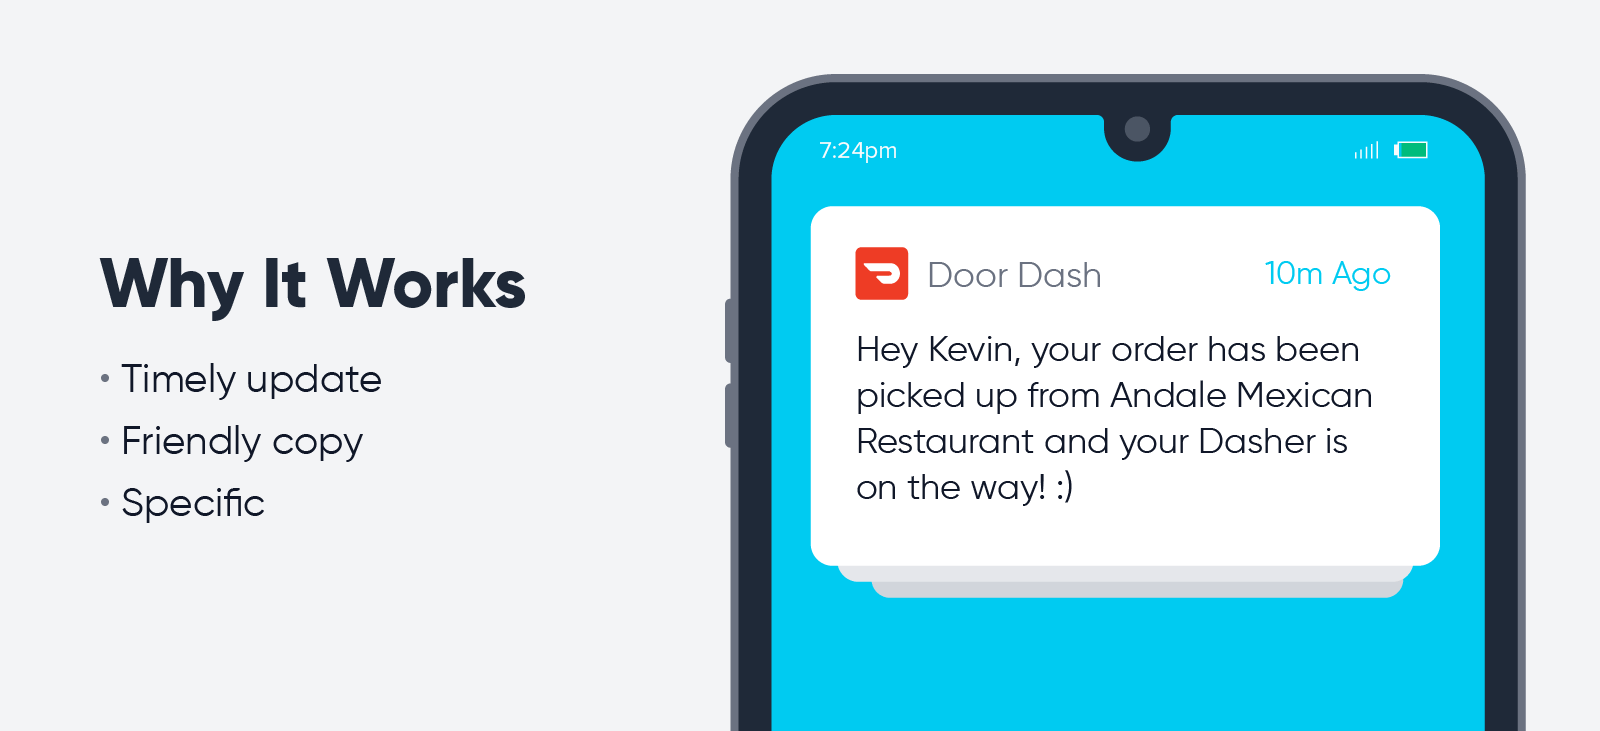 Image of a DoorDash push notification - with some useful best practice tips